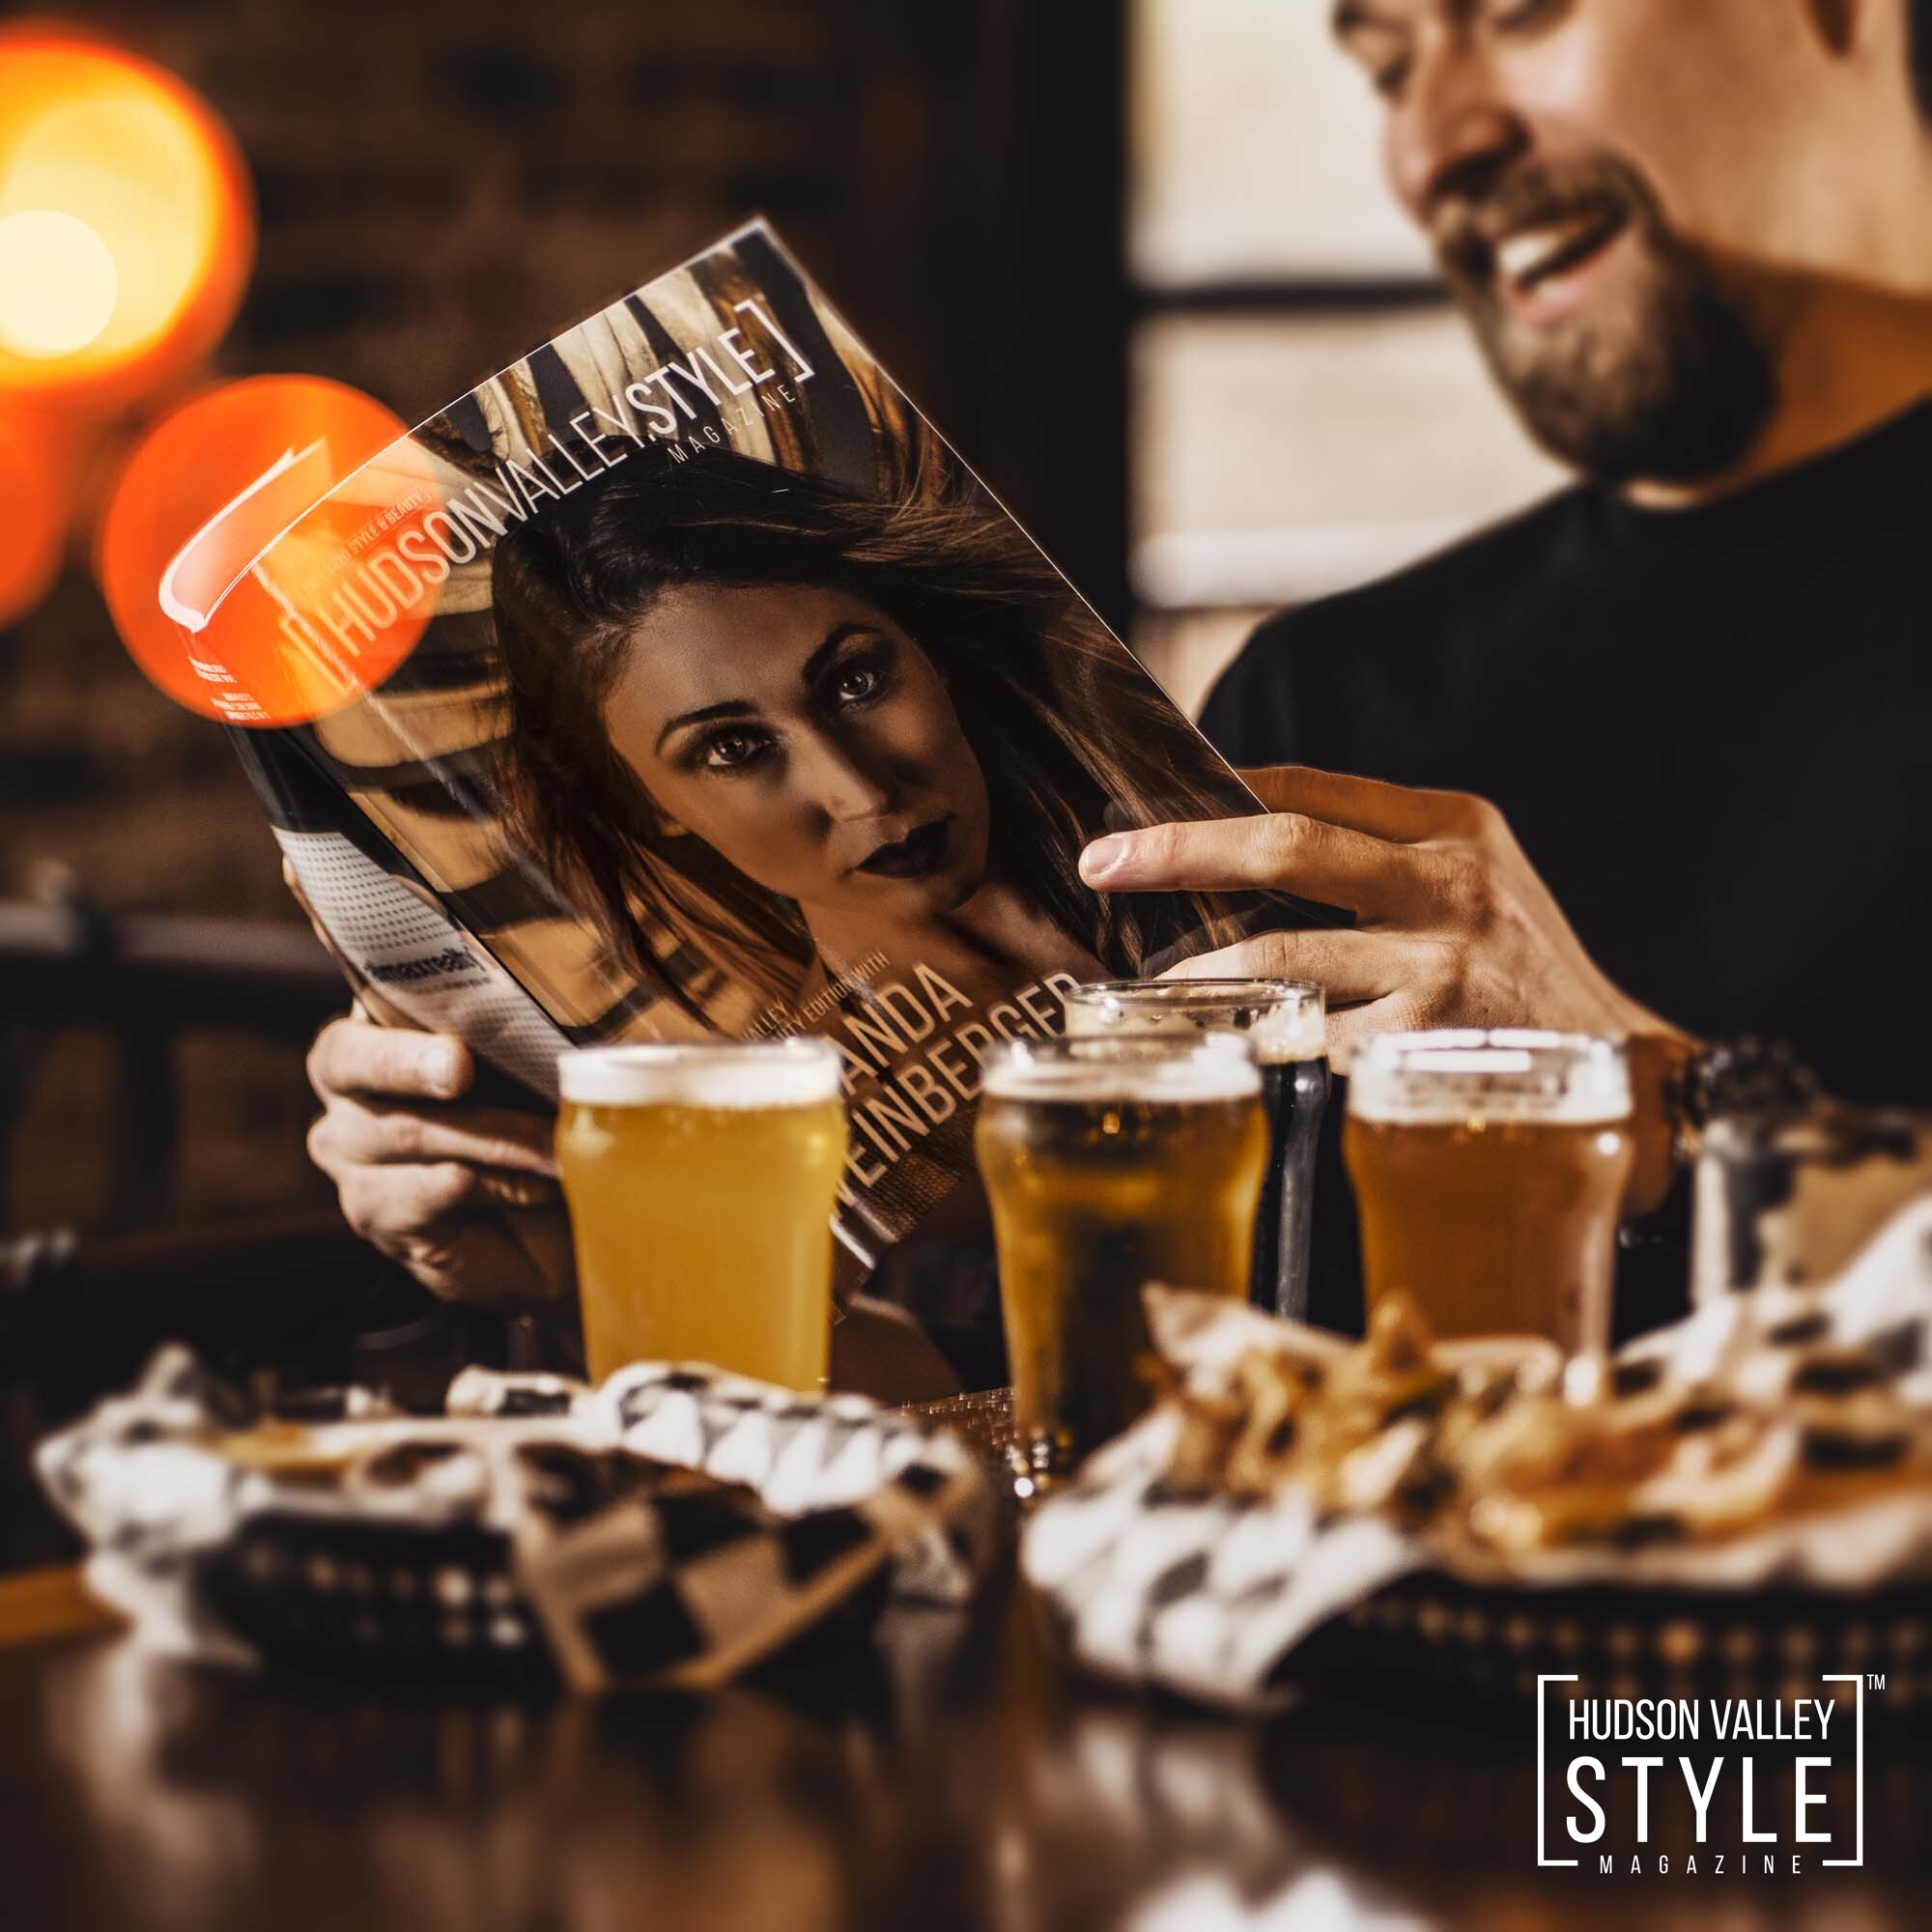 Newburgh Brewing Company - The Best Beer in Hudson Valley - Brewery Review by Kei Kullberg. Photography by Maxwell Alexander (Duncan Avenue Studios)